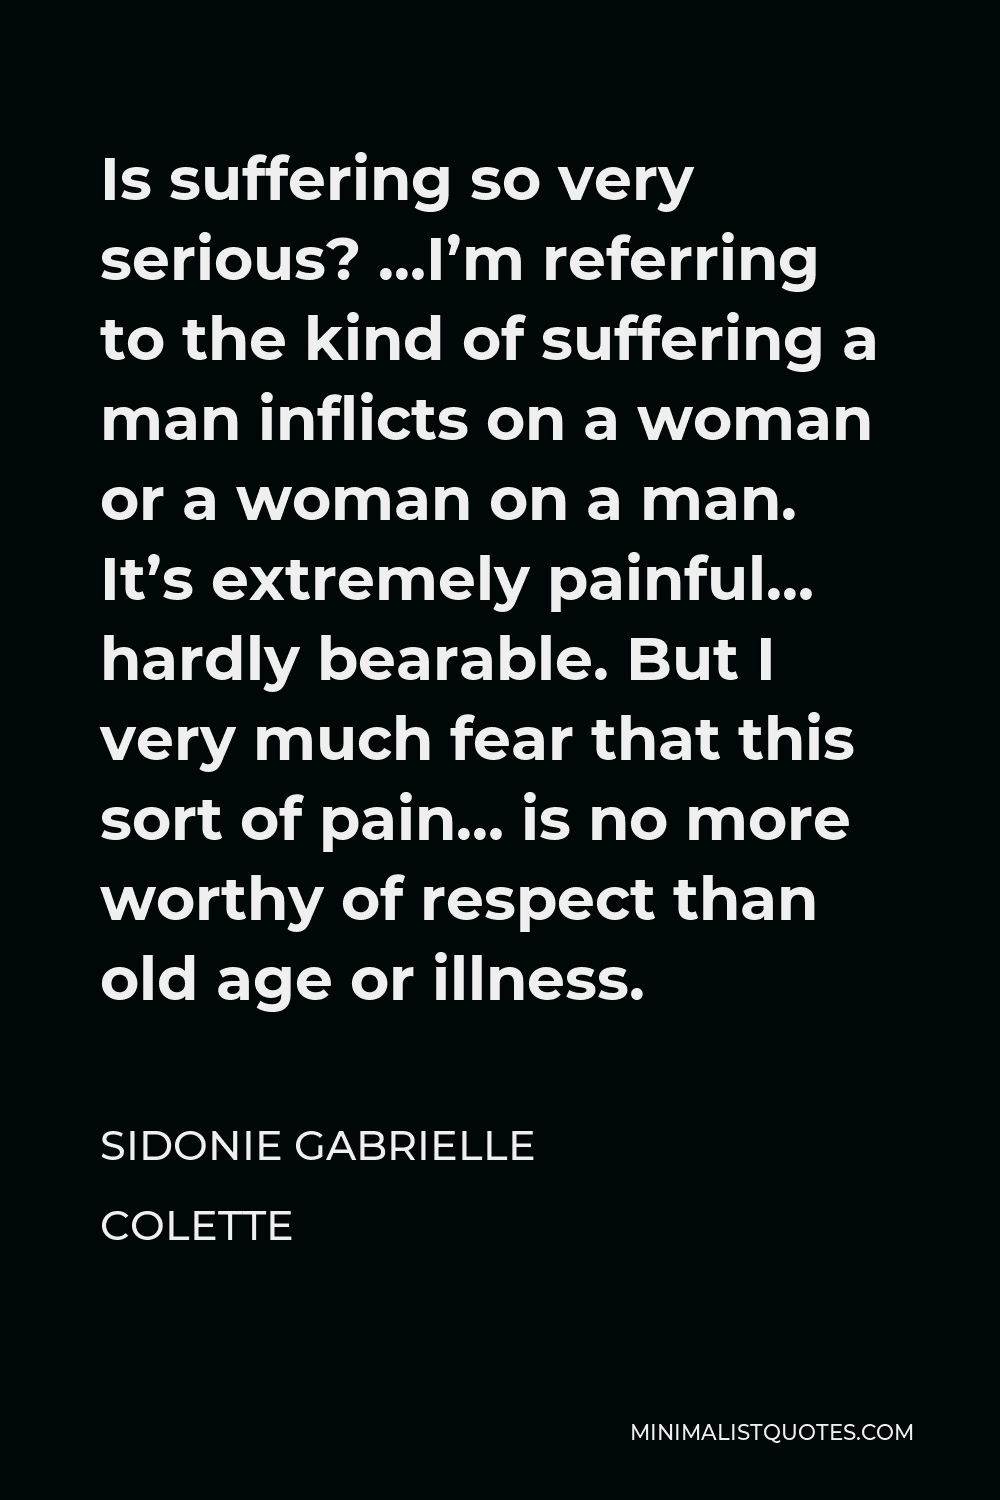 Sidonie Gabrielle Colette Quote - Is suffering so very serious? …I’m referring to the kind of suffering a man inflicts on a woman or a woman on a man. It’s extremely painful… hardly bearable. But I very much fear that this sort of pain… is no more worthy of respect than old age or illness.